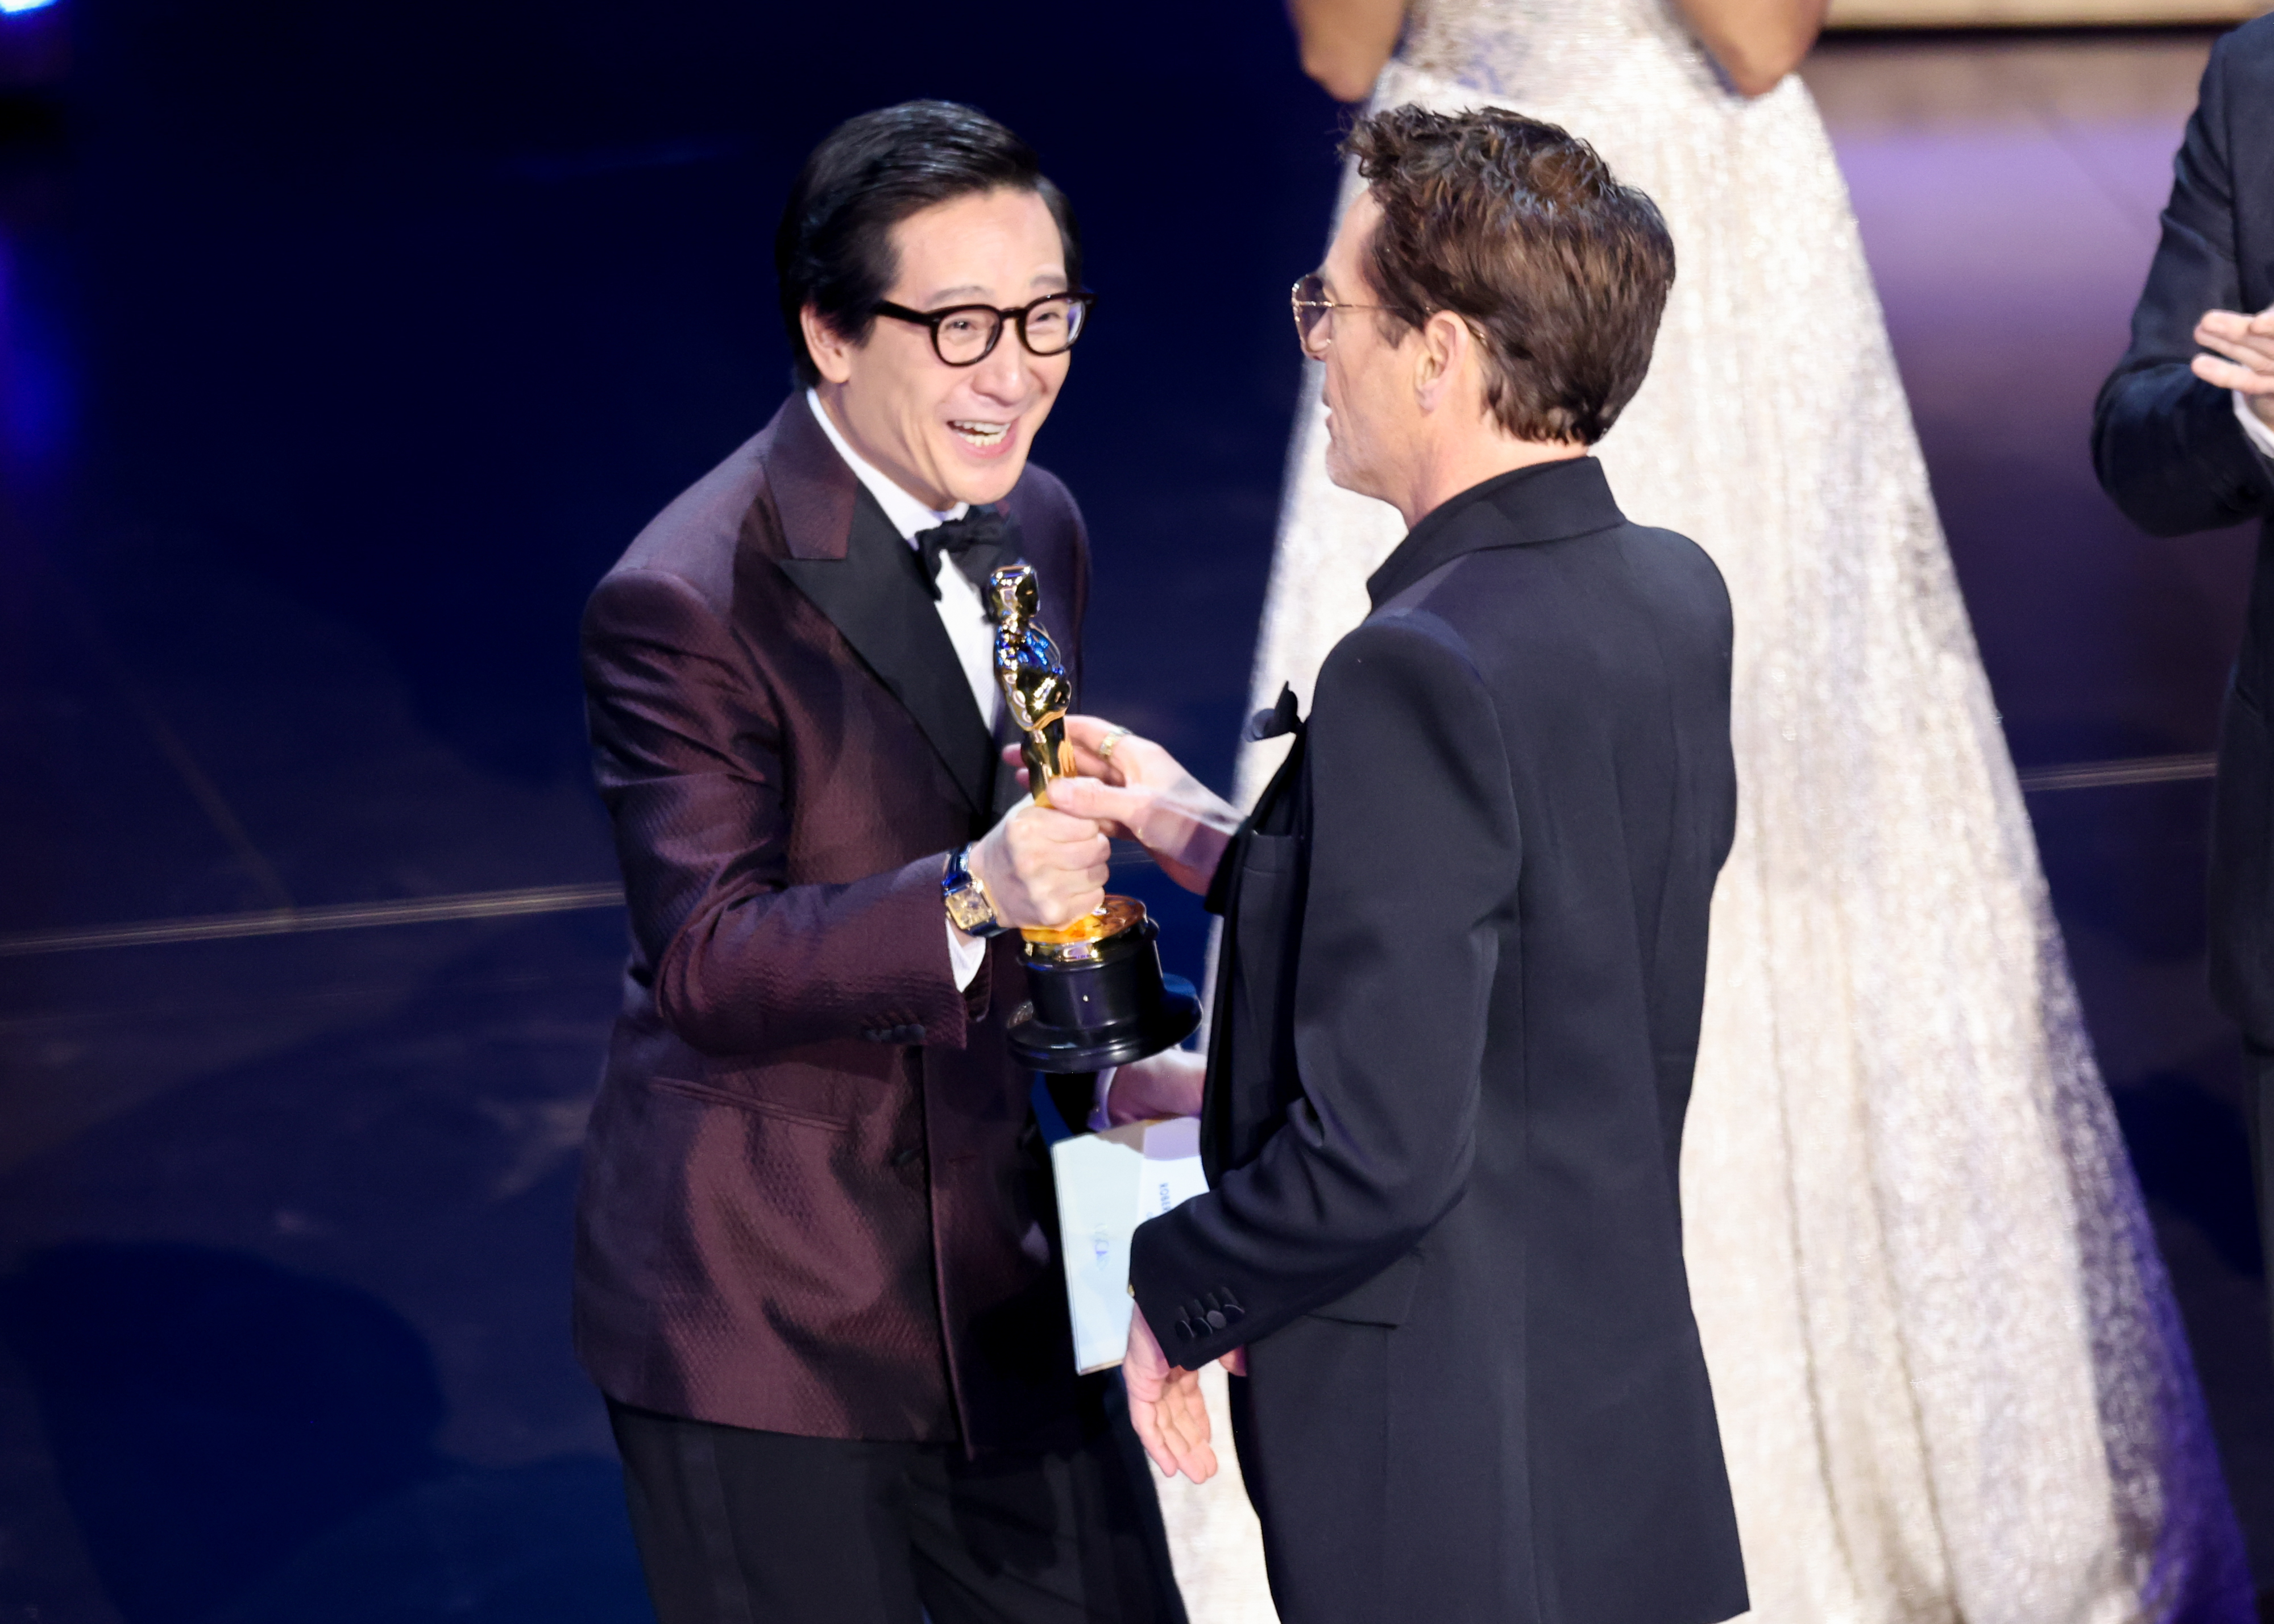 Ke Huy smiling at RDJ onstage and presenting the Oscar statuette to him